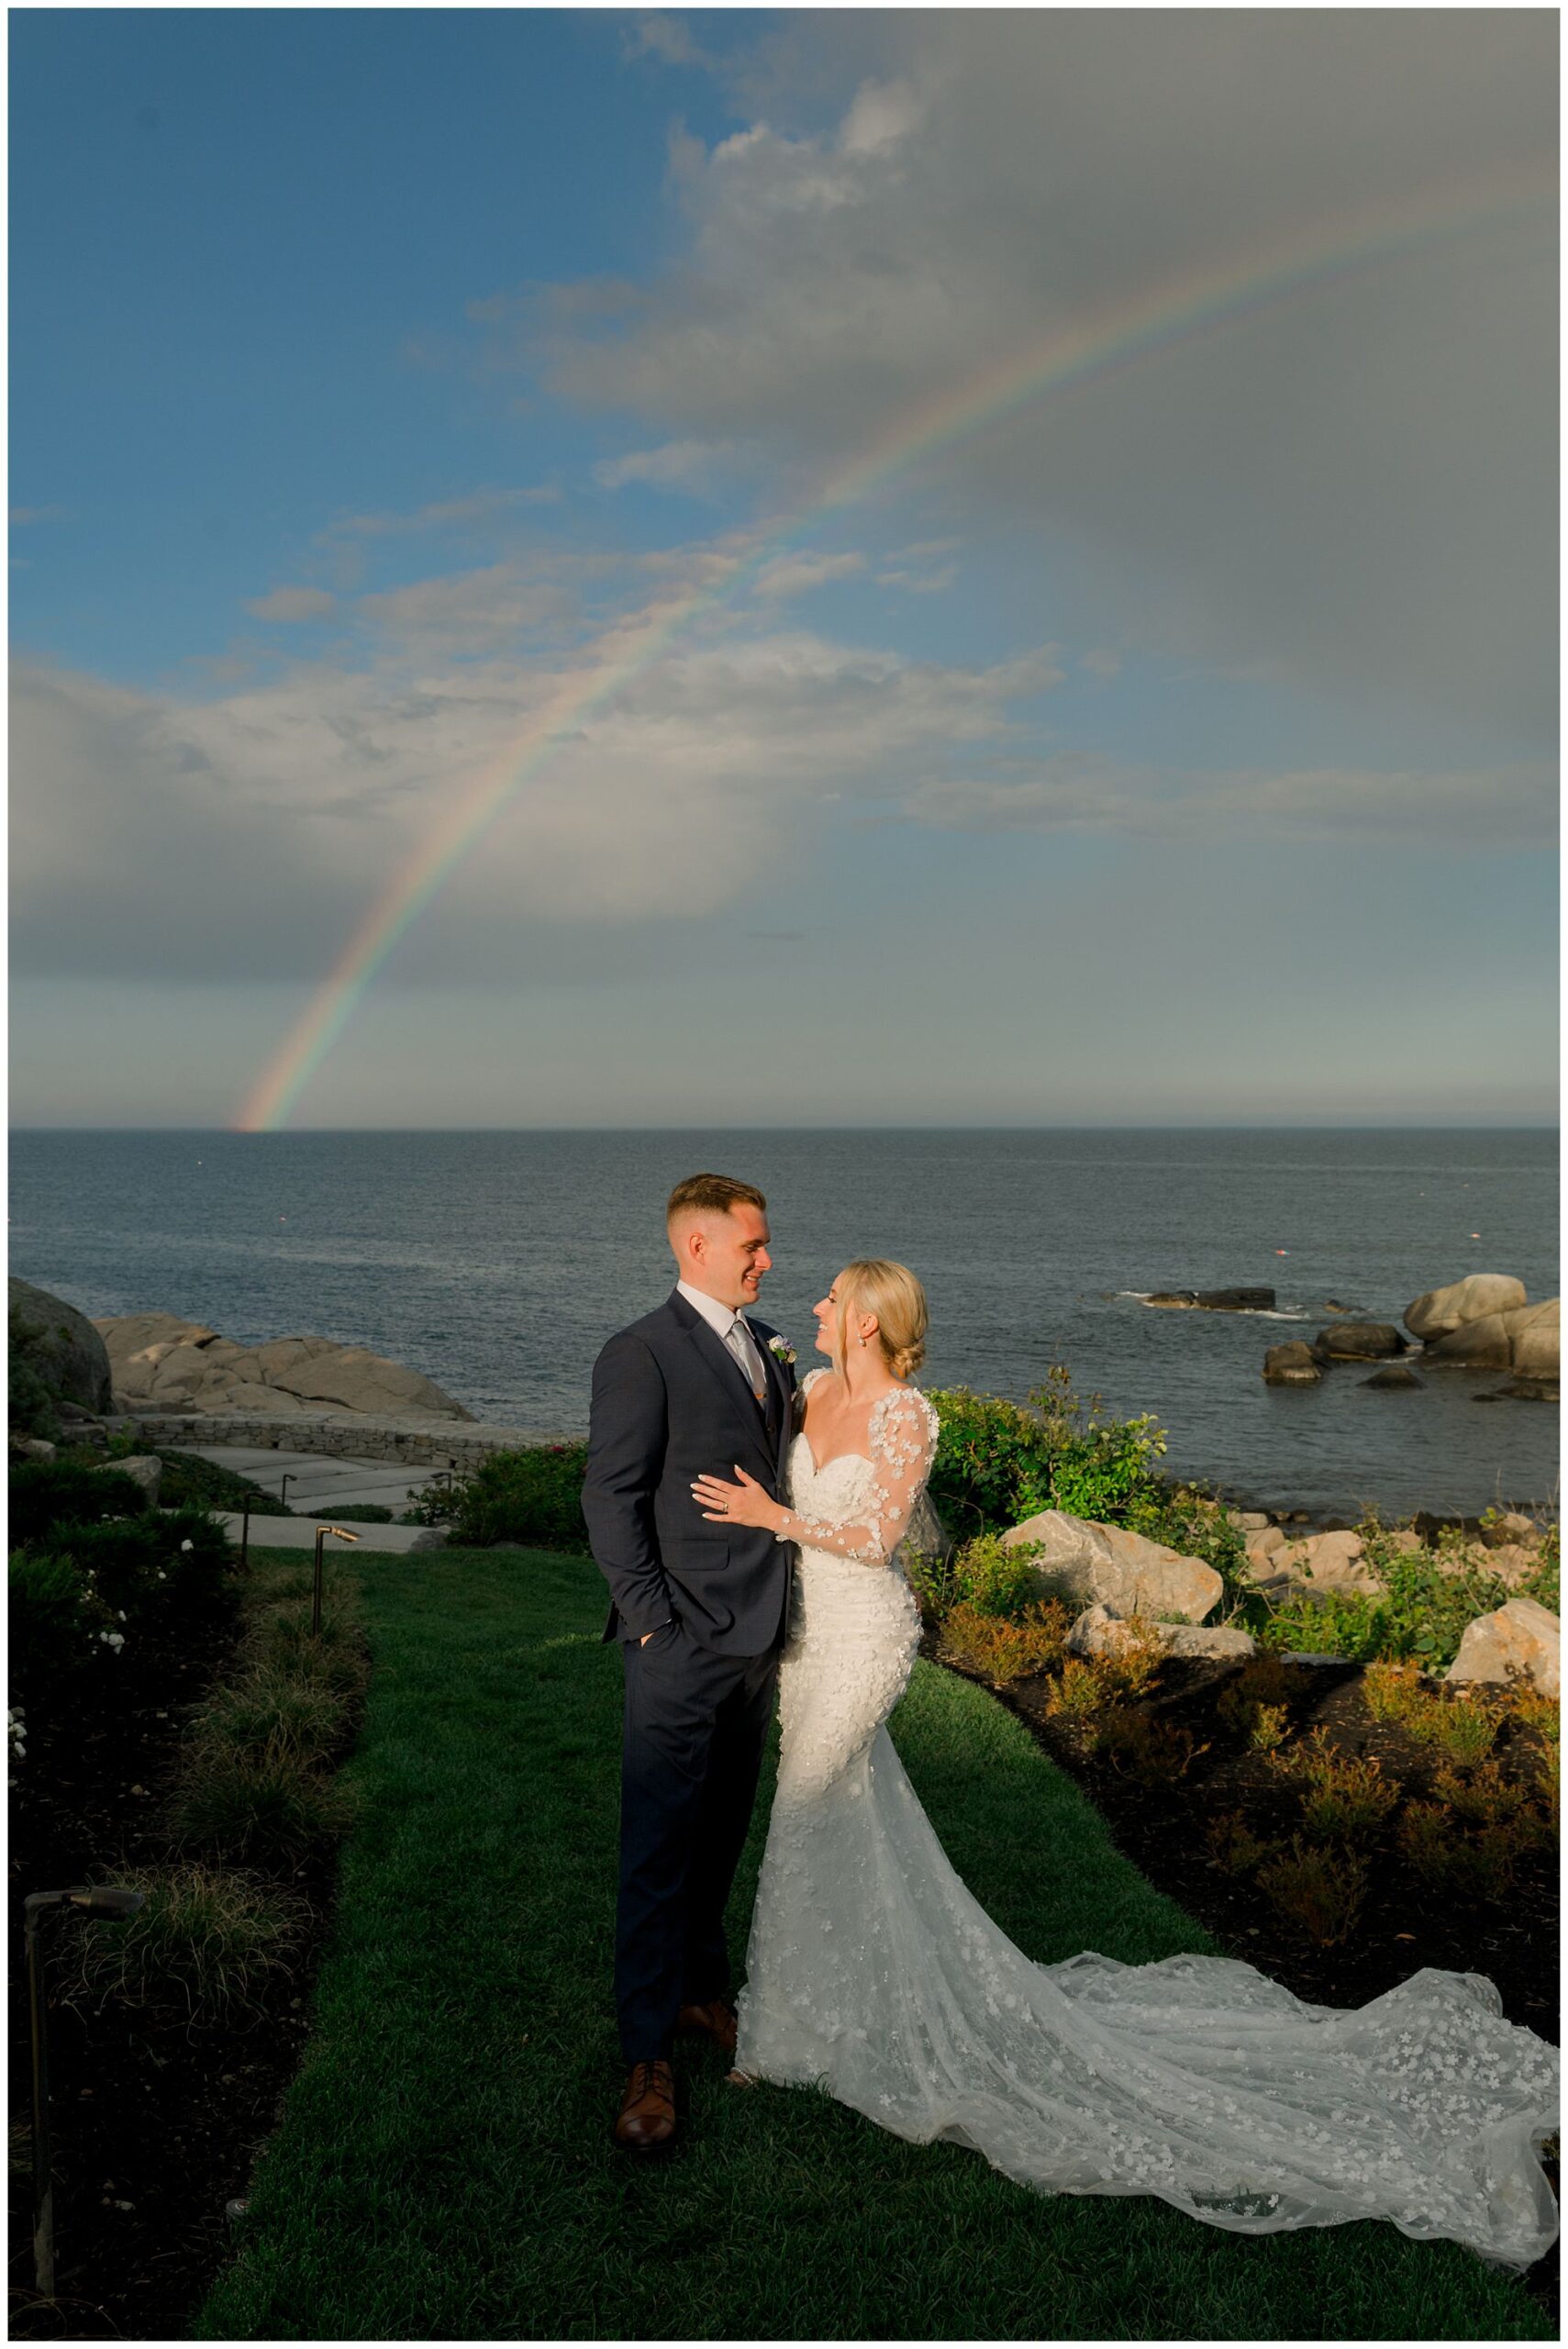 Rainbow appears during wedding at Viewpoint Hotel in York Maine